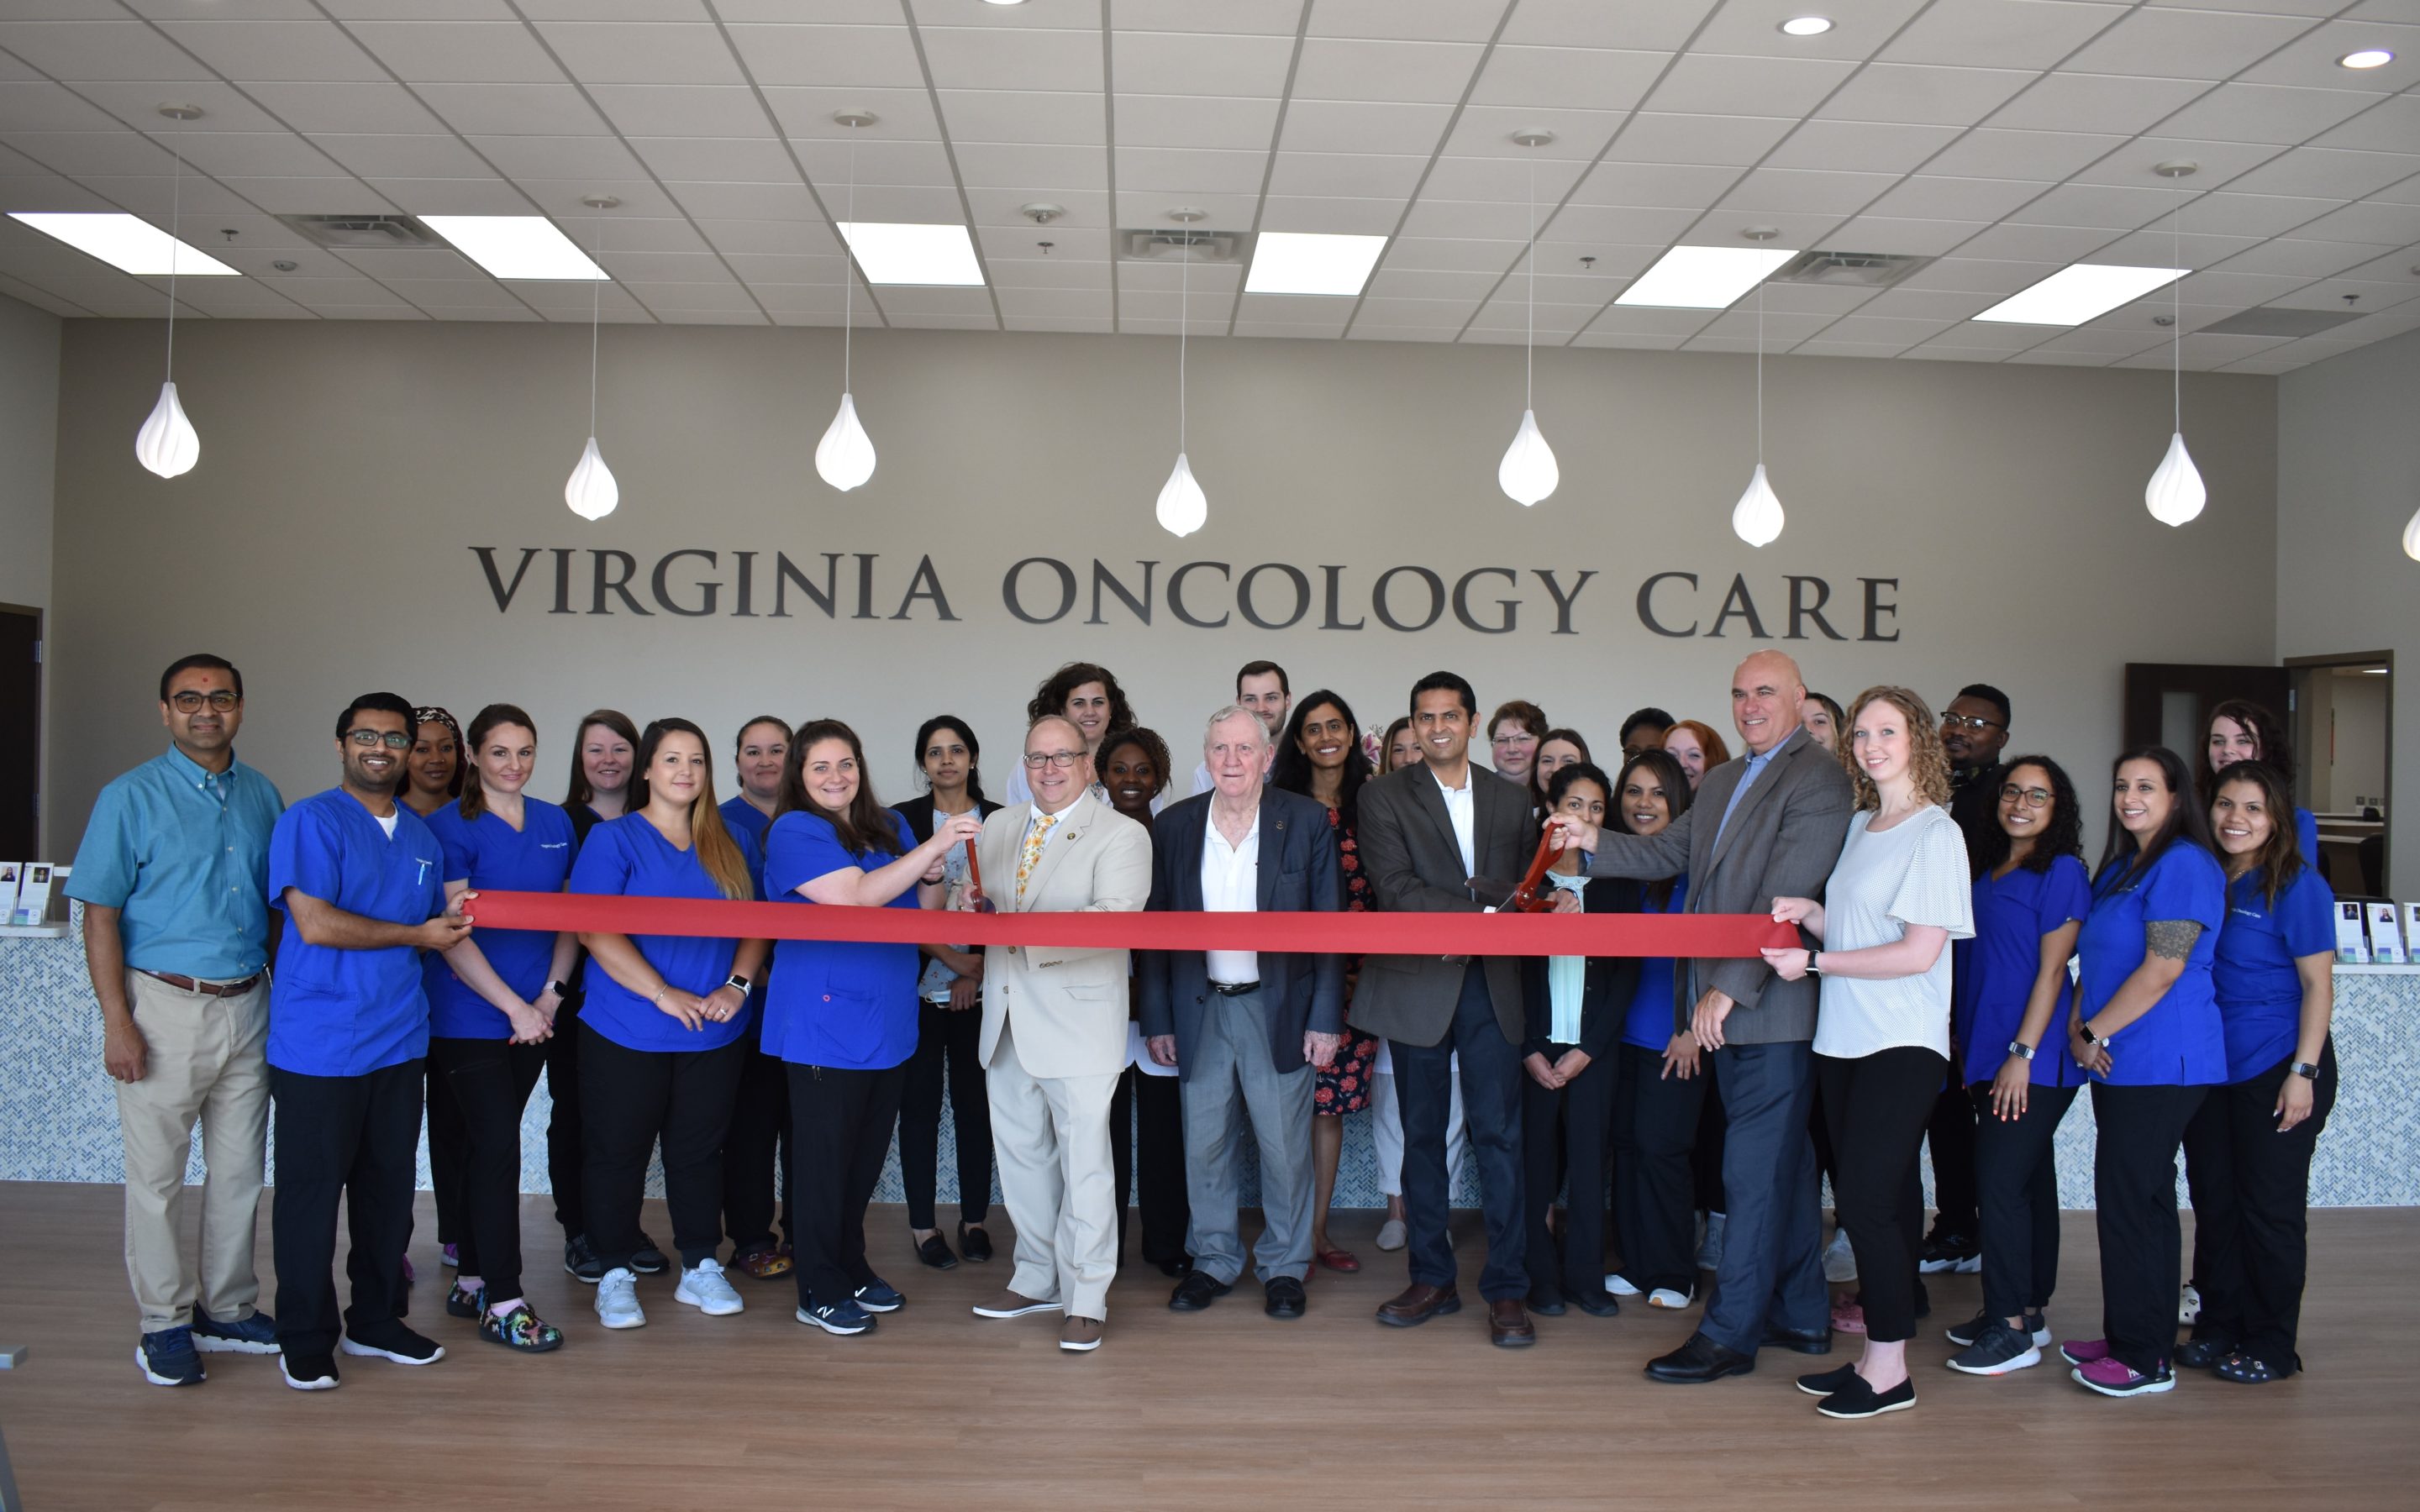 Stafford County welcomes Virginia Oncology Care to Chatham Heights